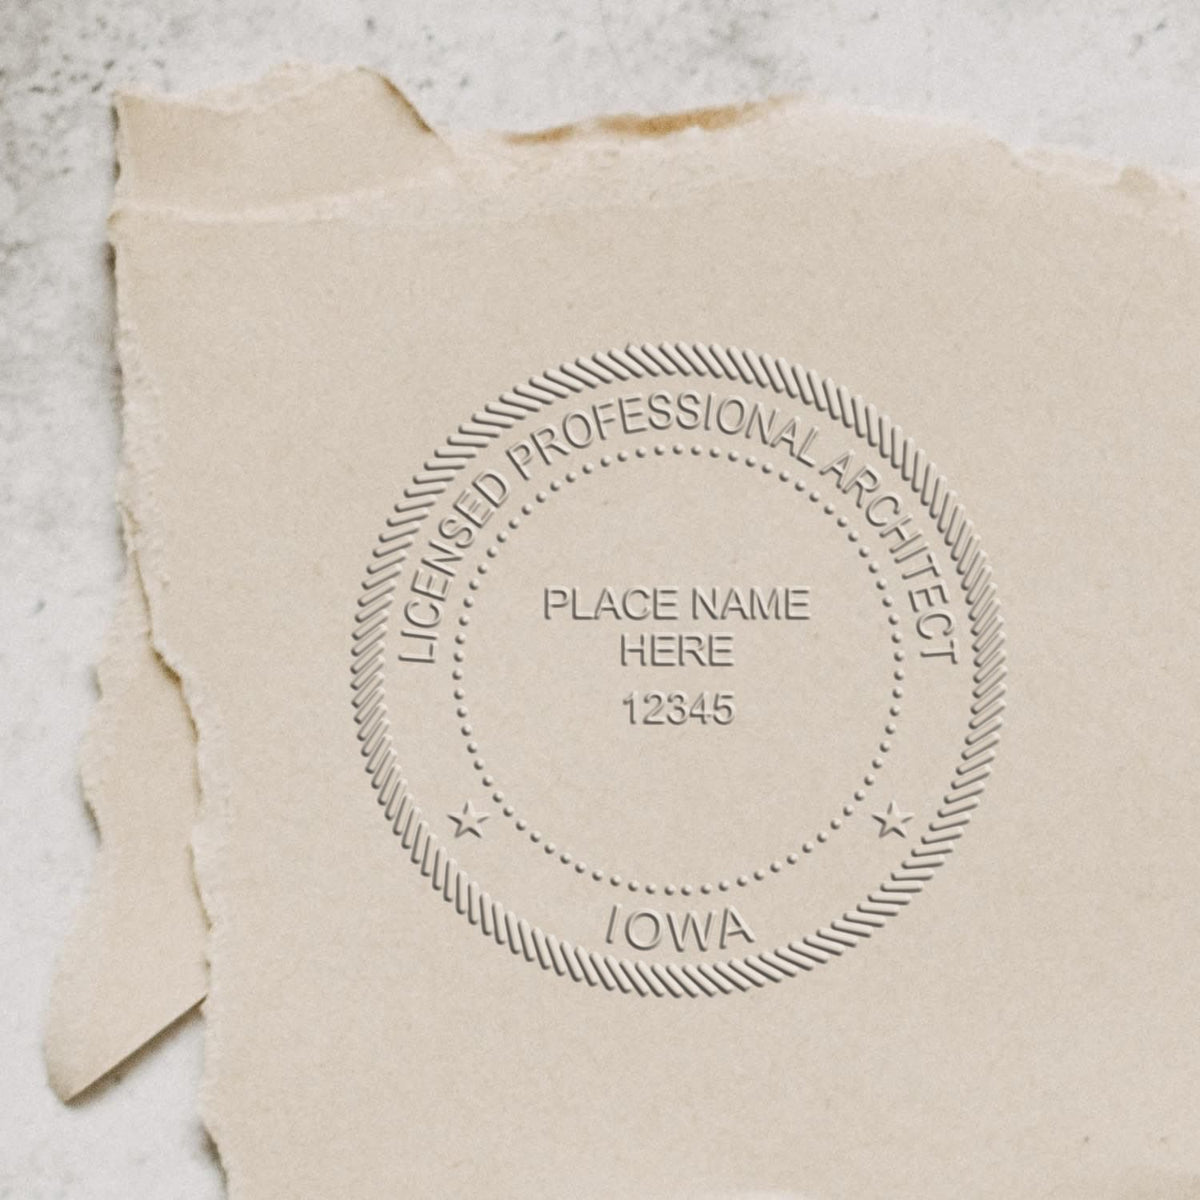 An in use photo of the Hybrid Iowa Architect Seal showing a sample imprint on a cardstock